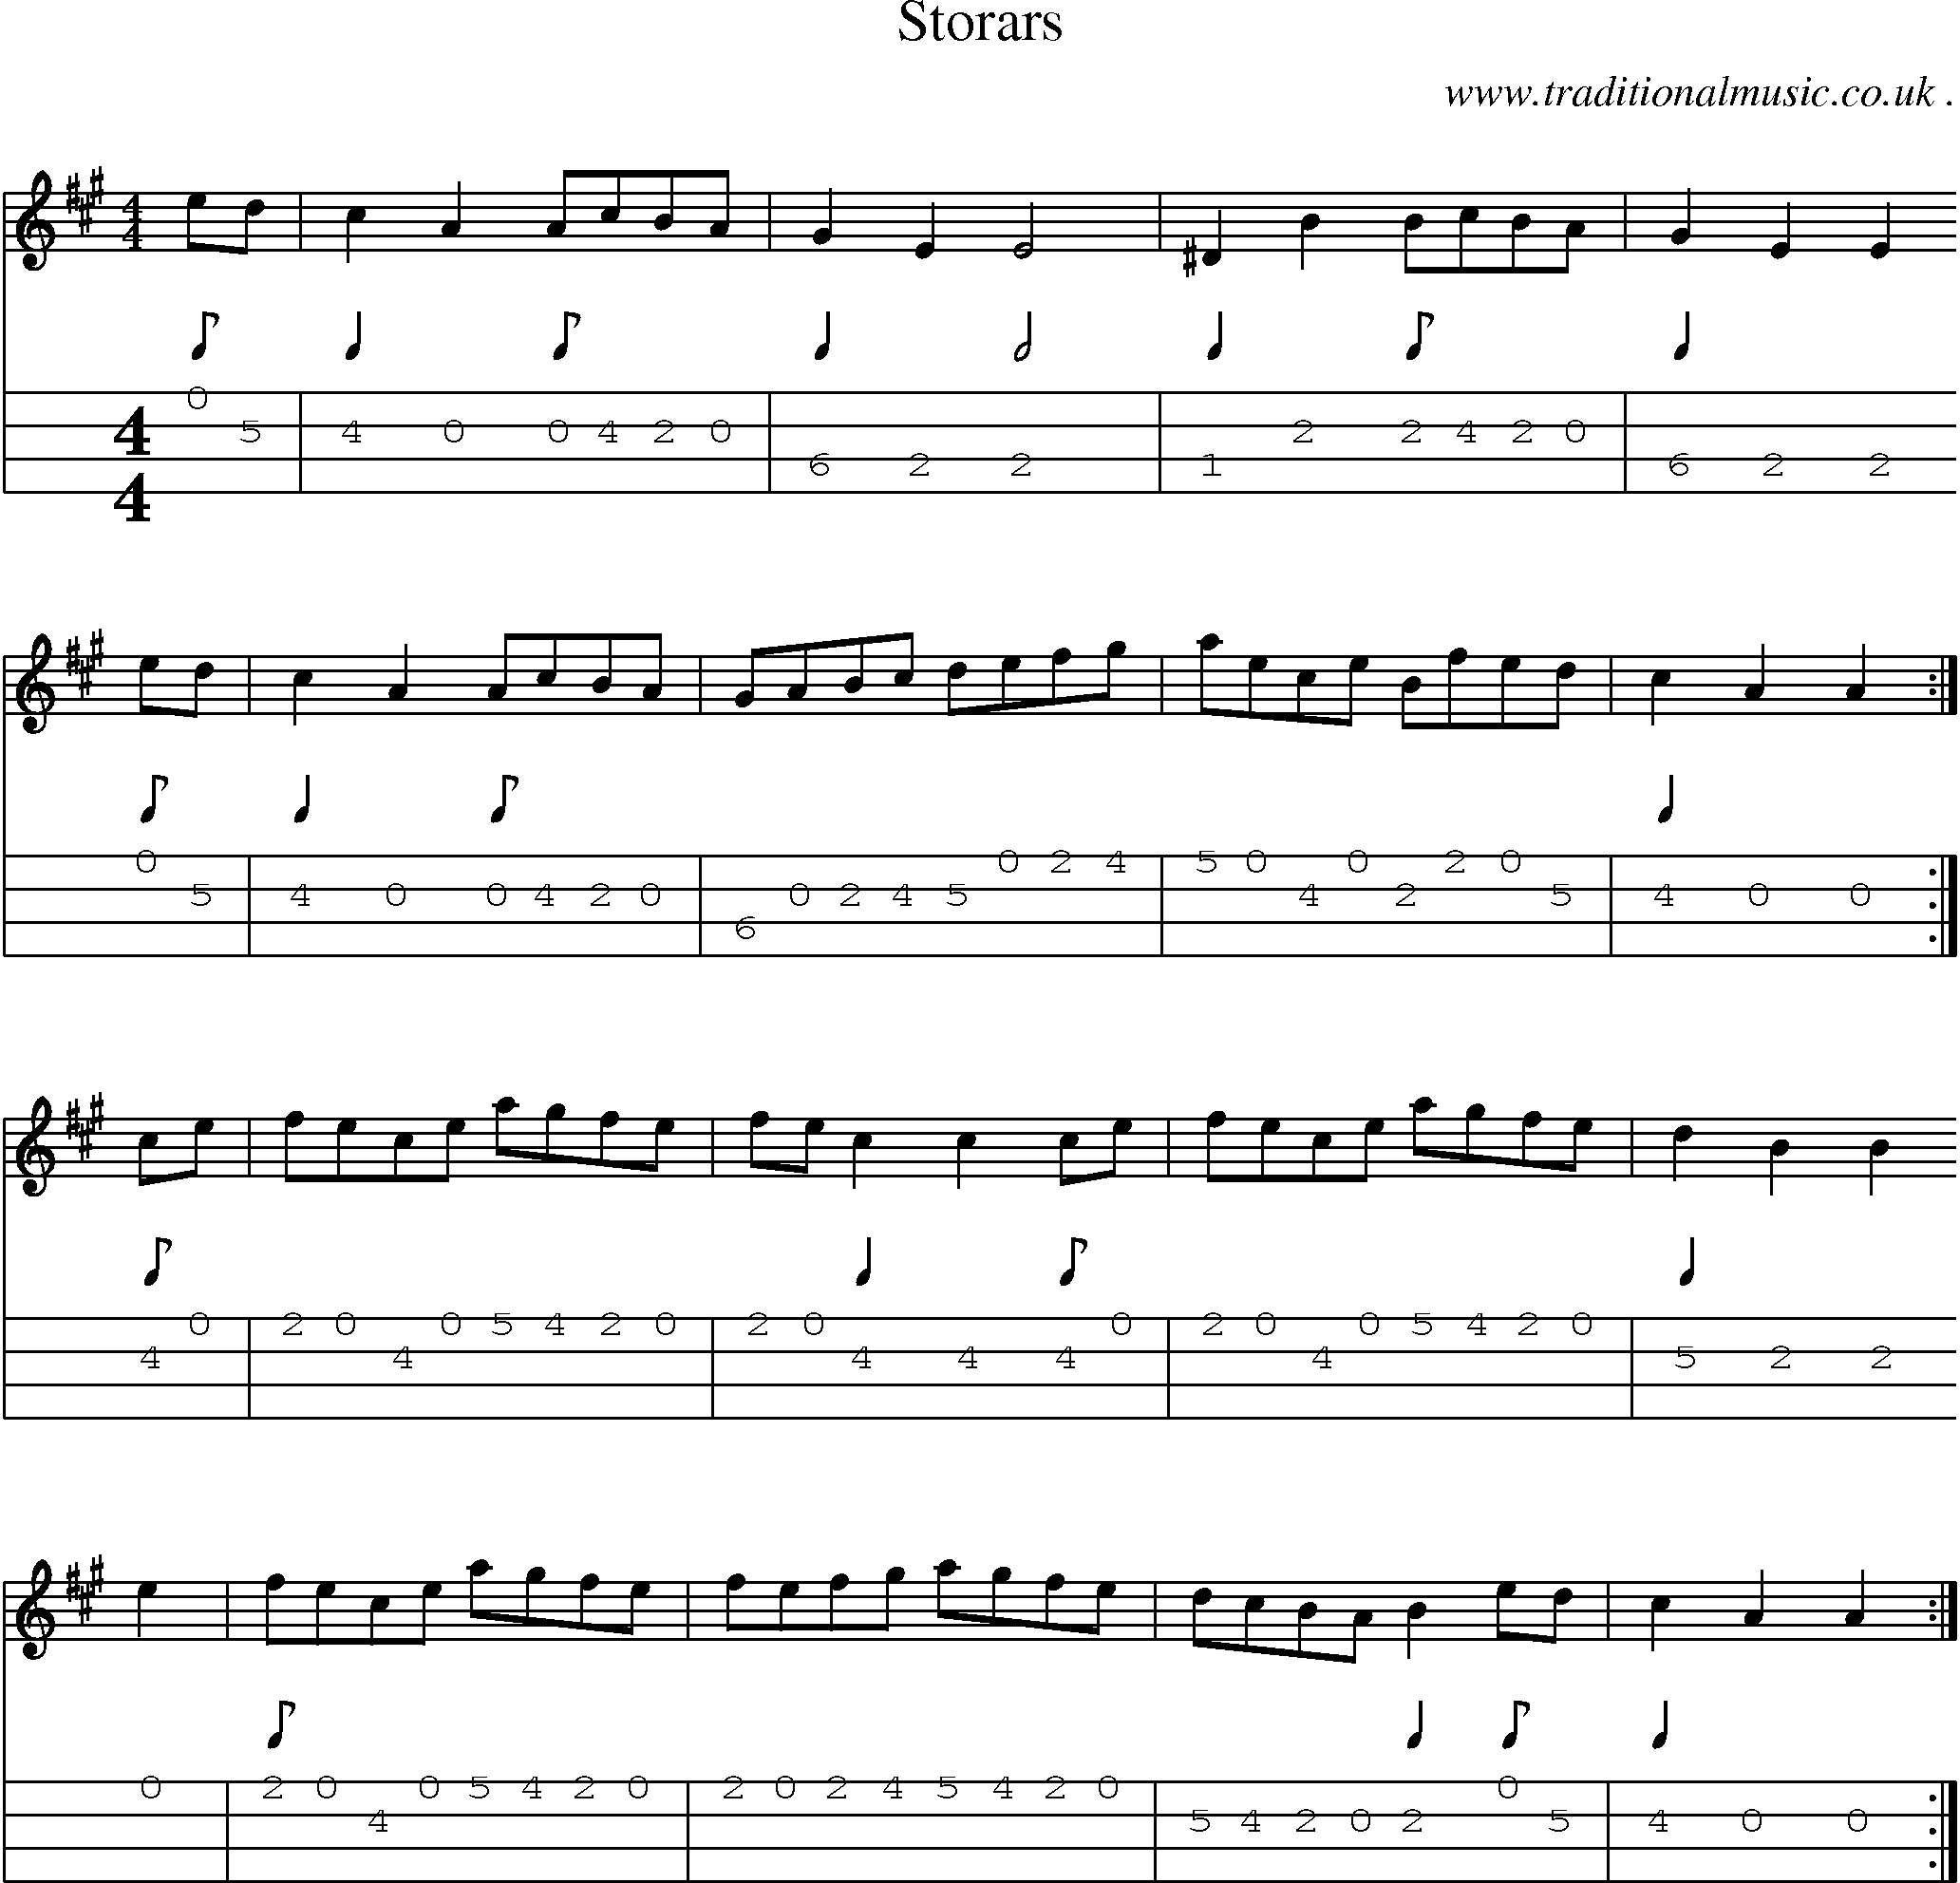 Sheet-music  score, Chords and Mandolin Tabs for Storars